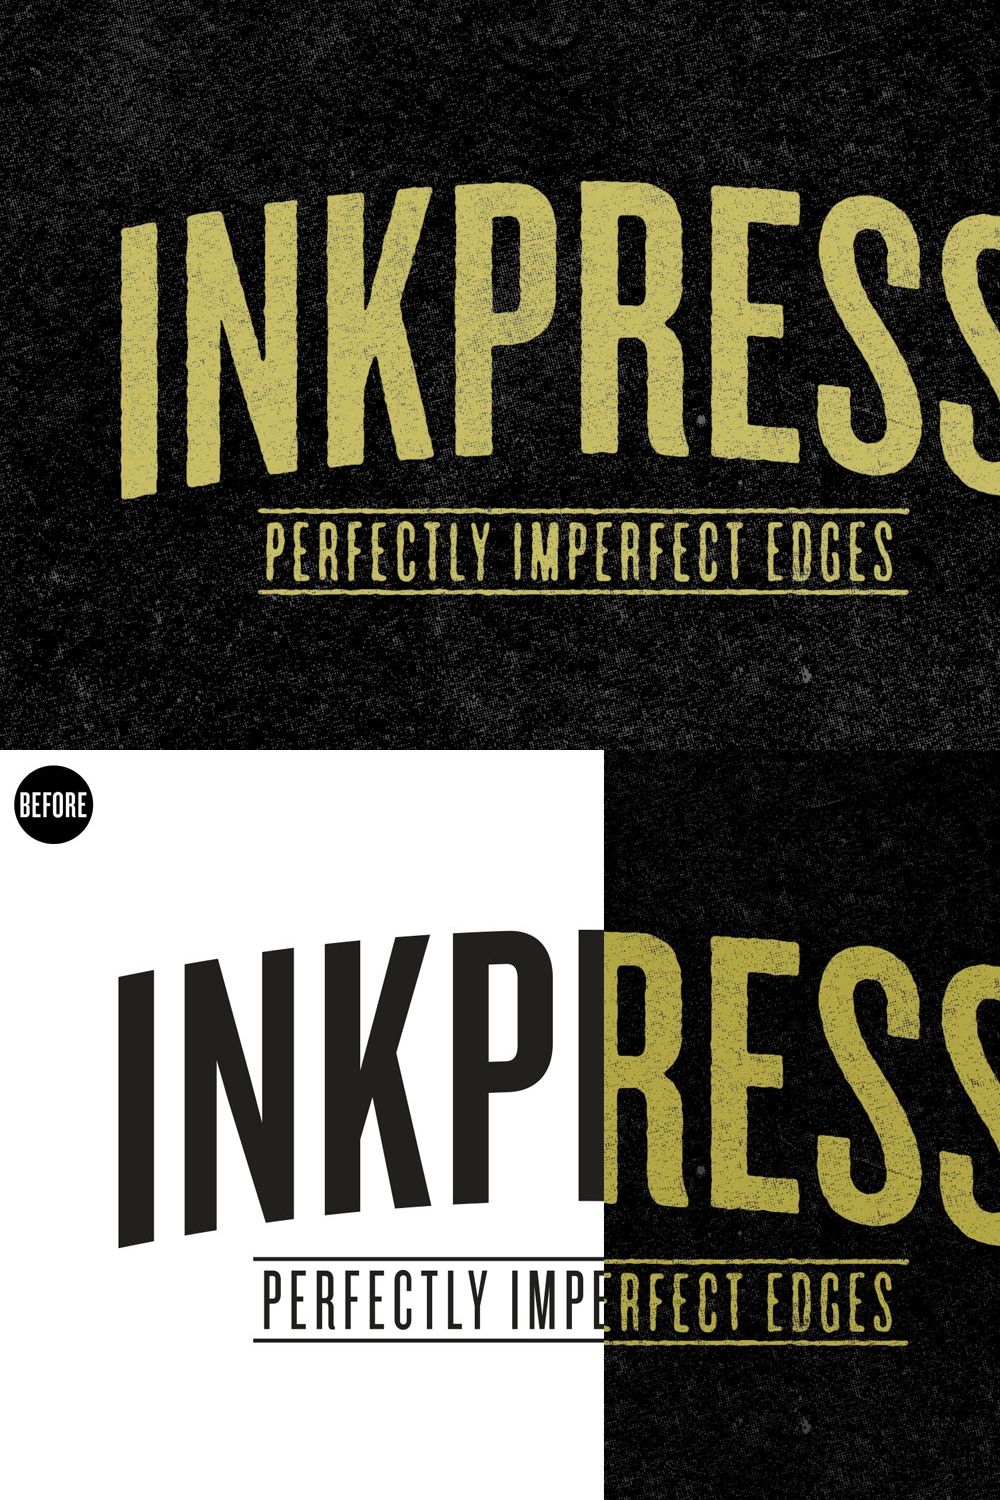 INKPRESS pinterest preview image.